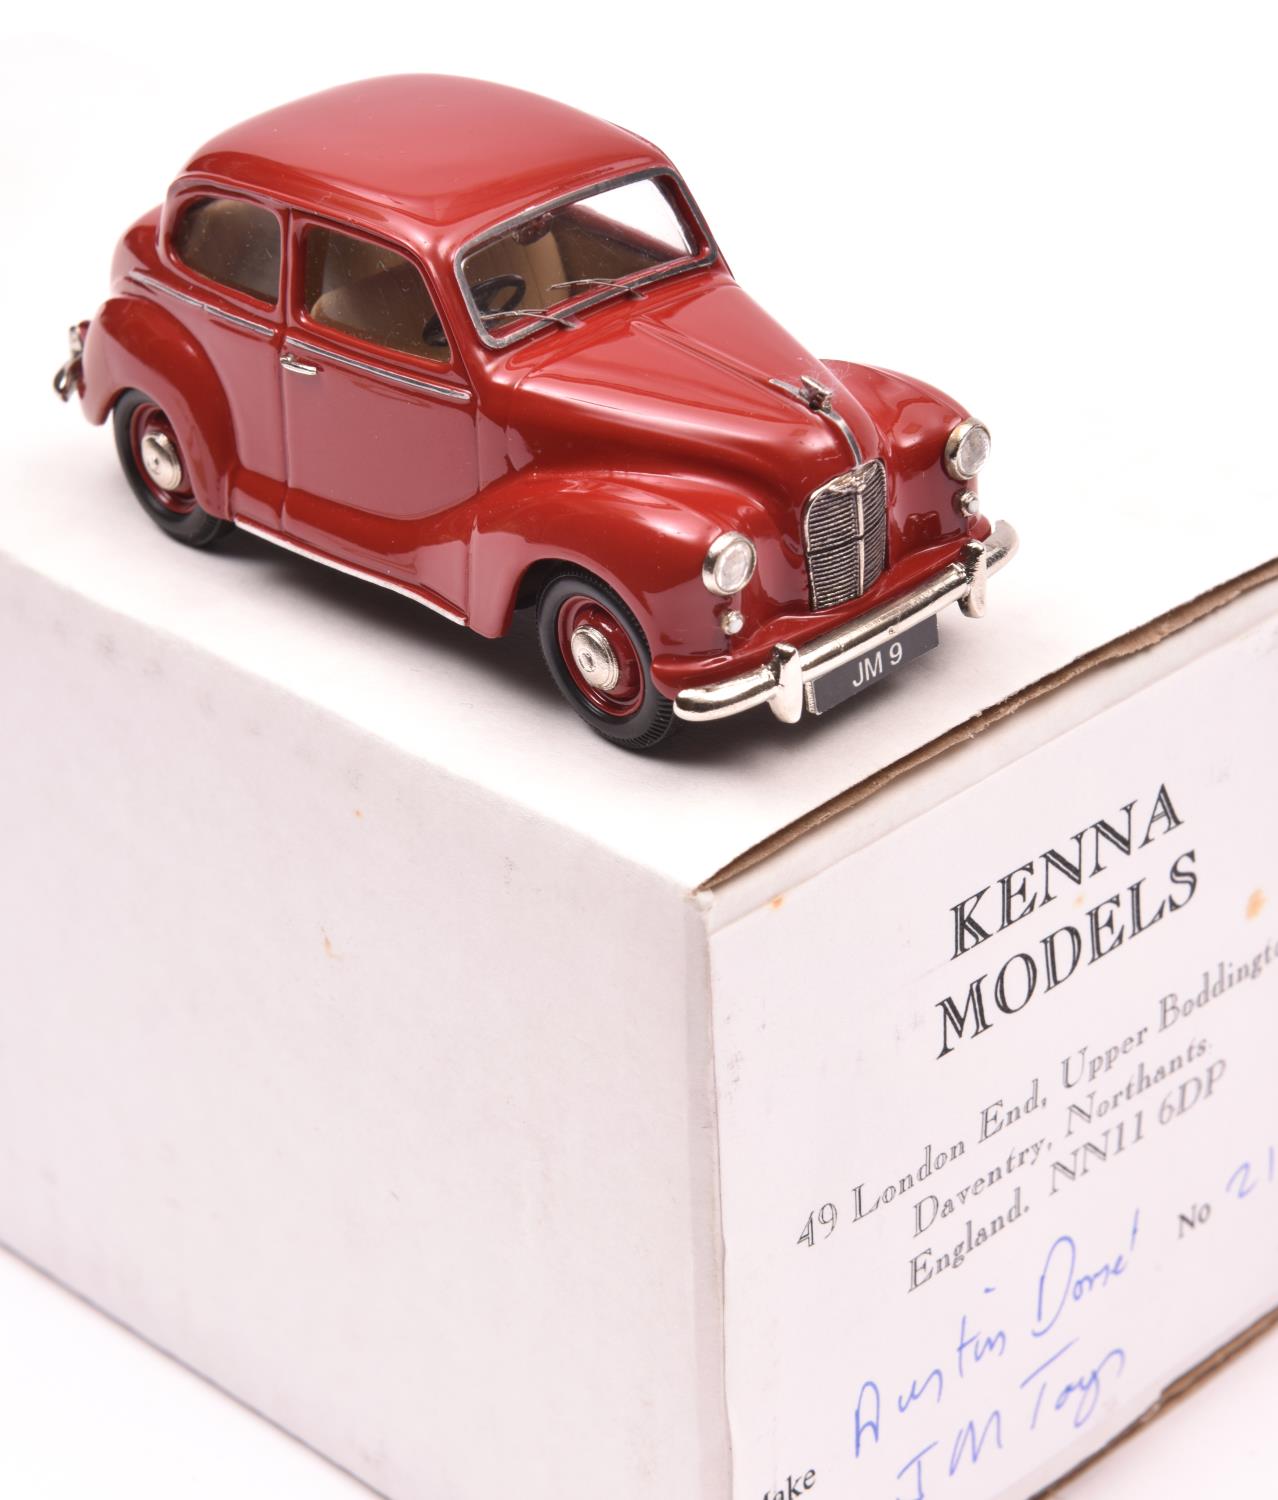 Kenna Models Austin Dorset. A rare example in red with tan interior. Boxed, with certificate 'No.